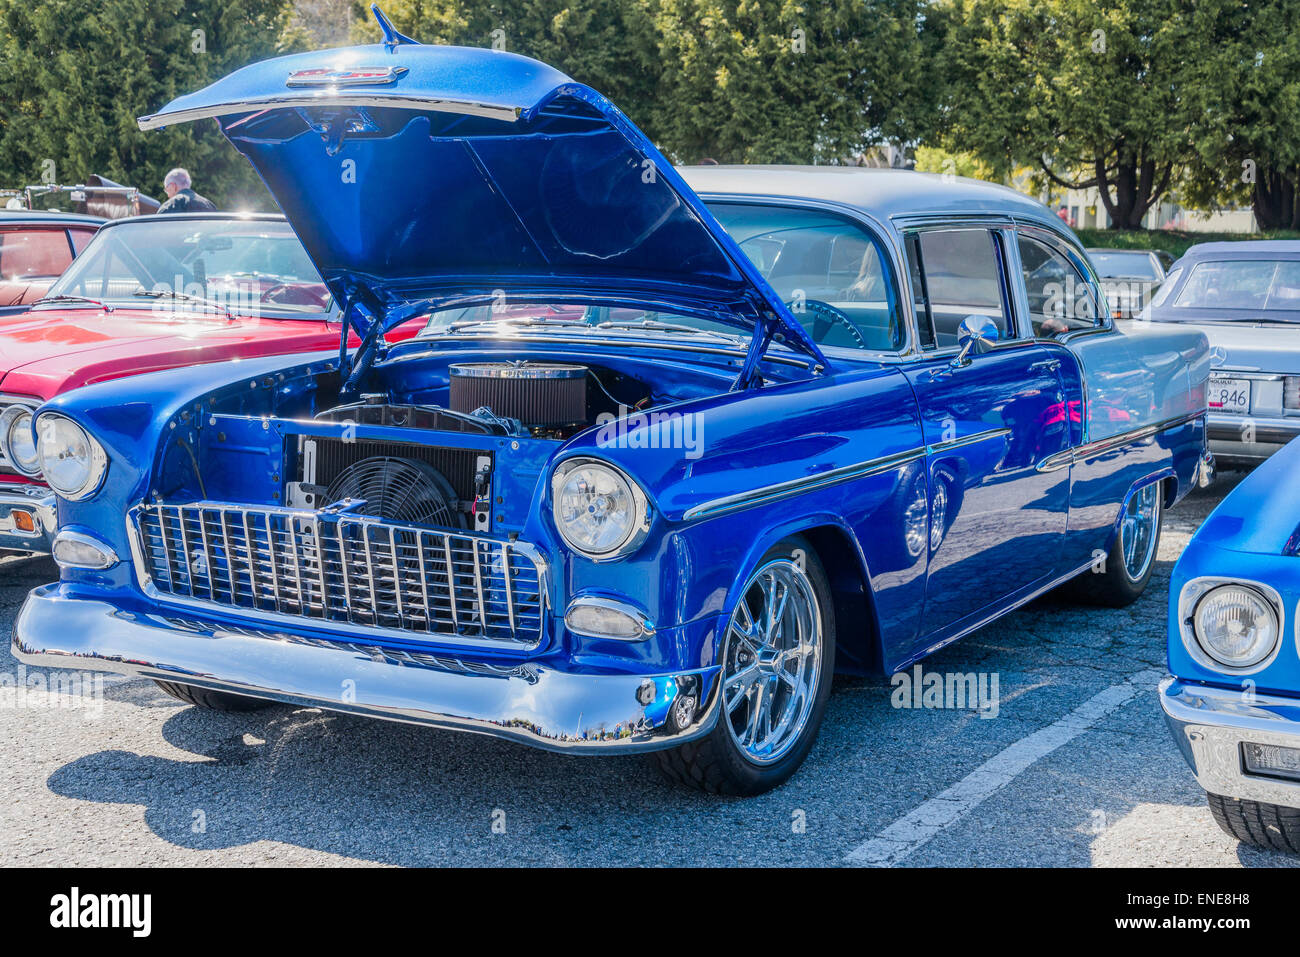 Classic blue Chevrolet automobile with hood up at car show Stock Photo